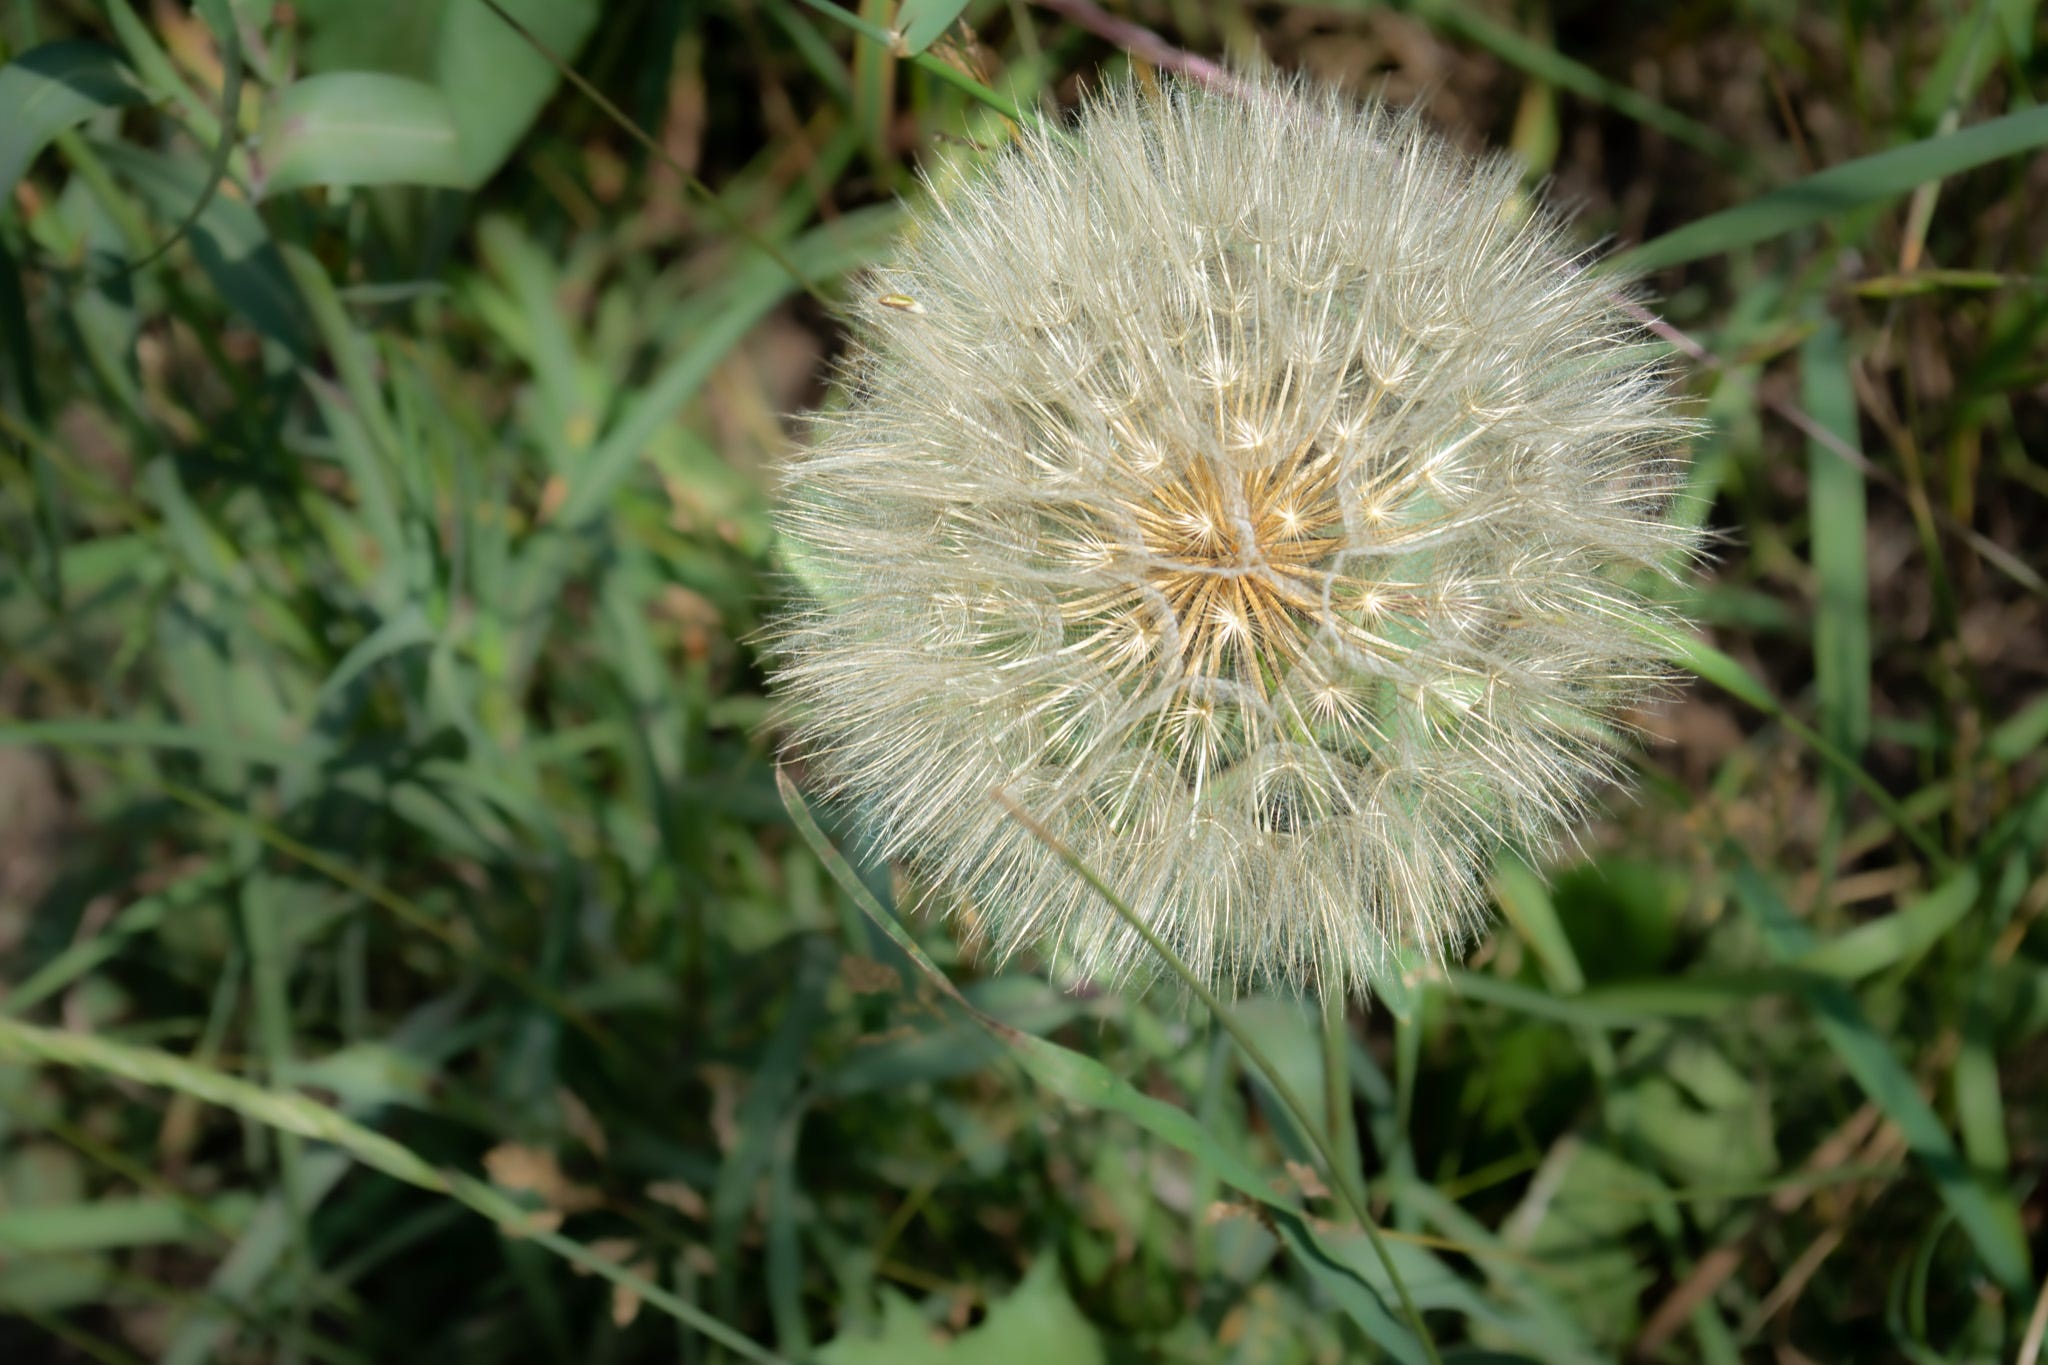 A dandelion seed pod against the grass